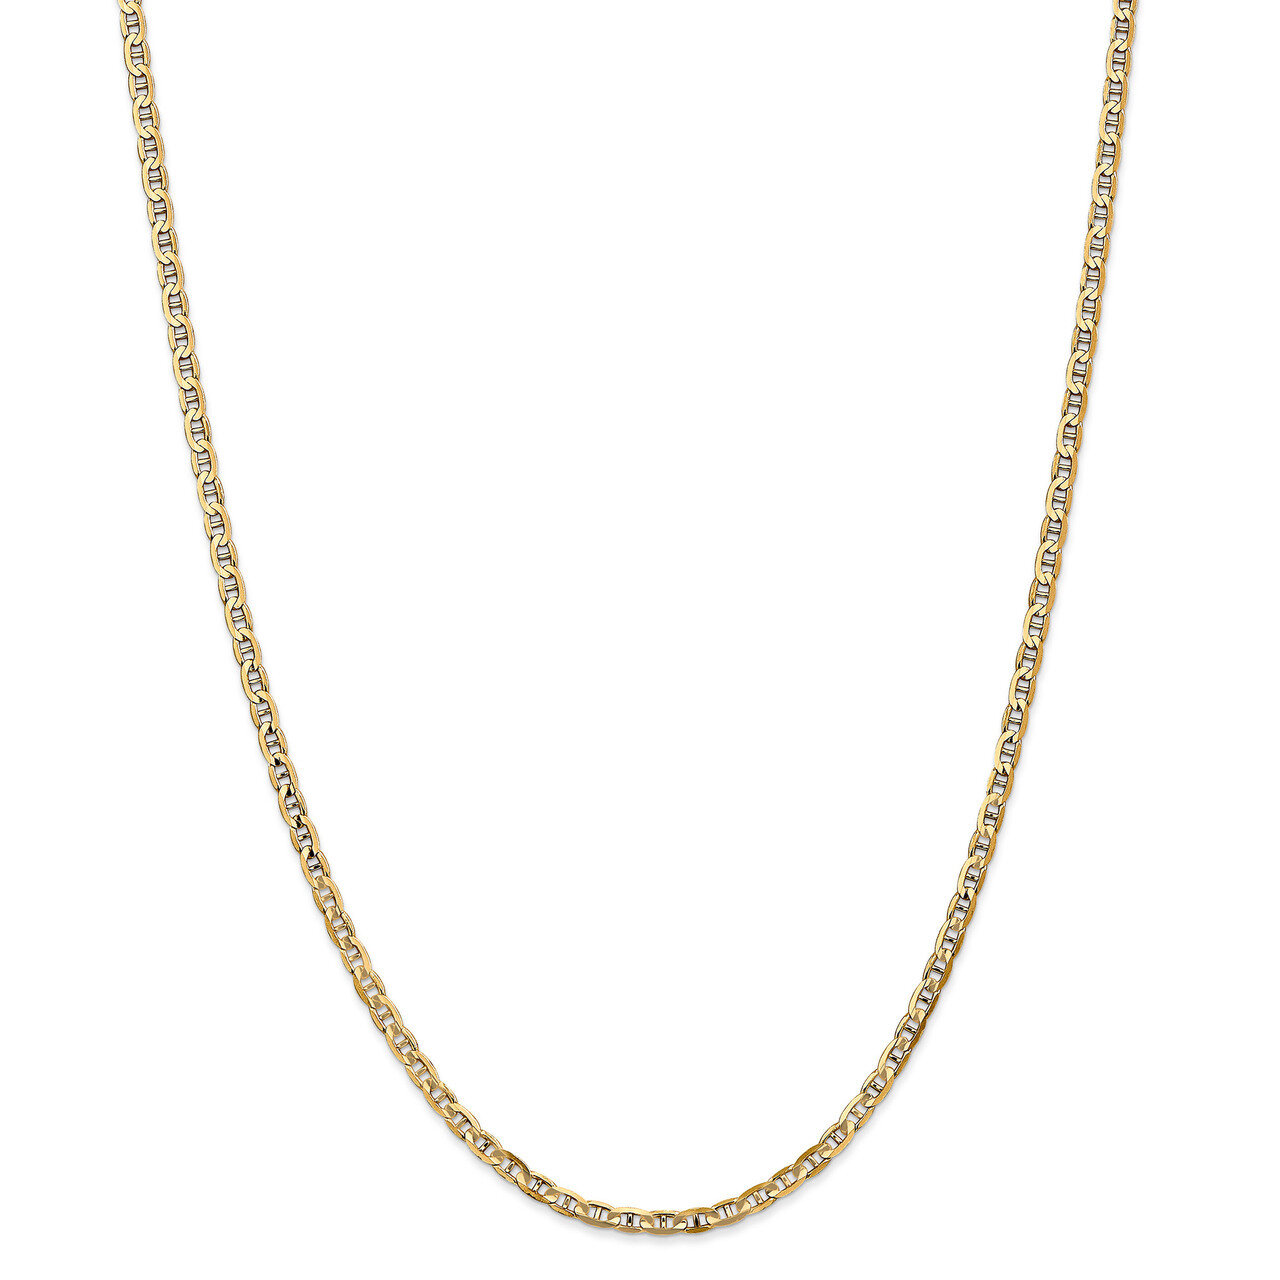 3mm Concave Anchor Chain 18 Inch 14k Gold HB-1314-18